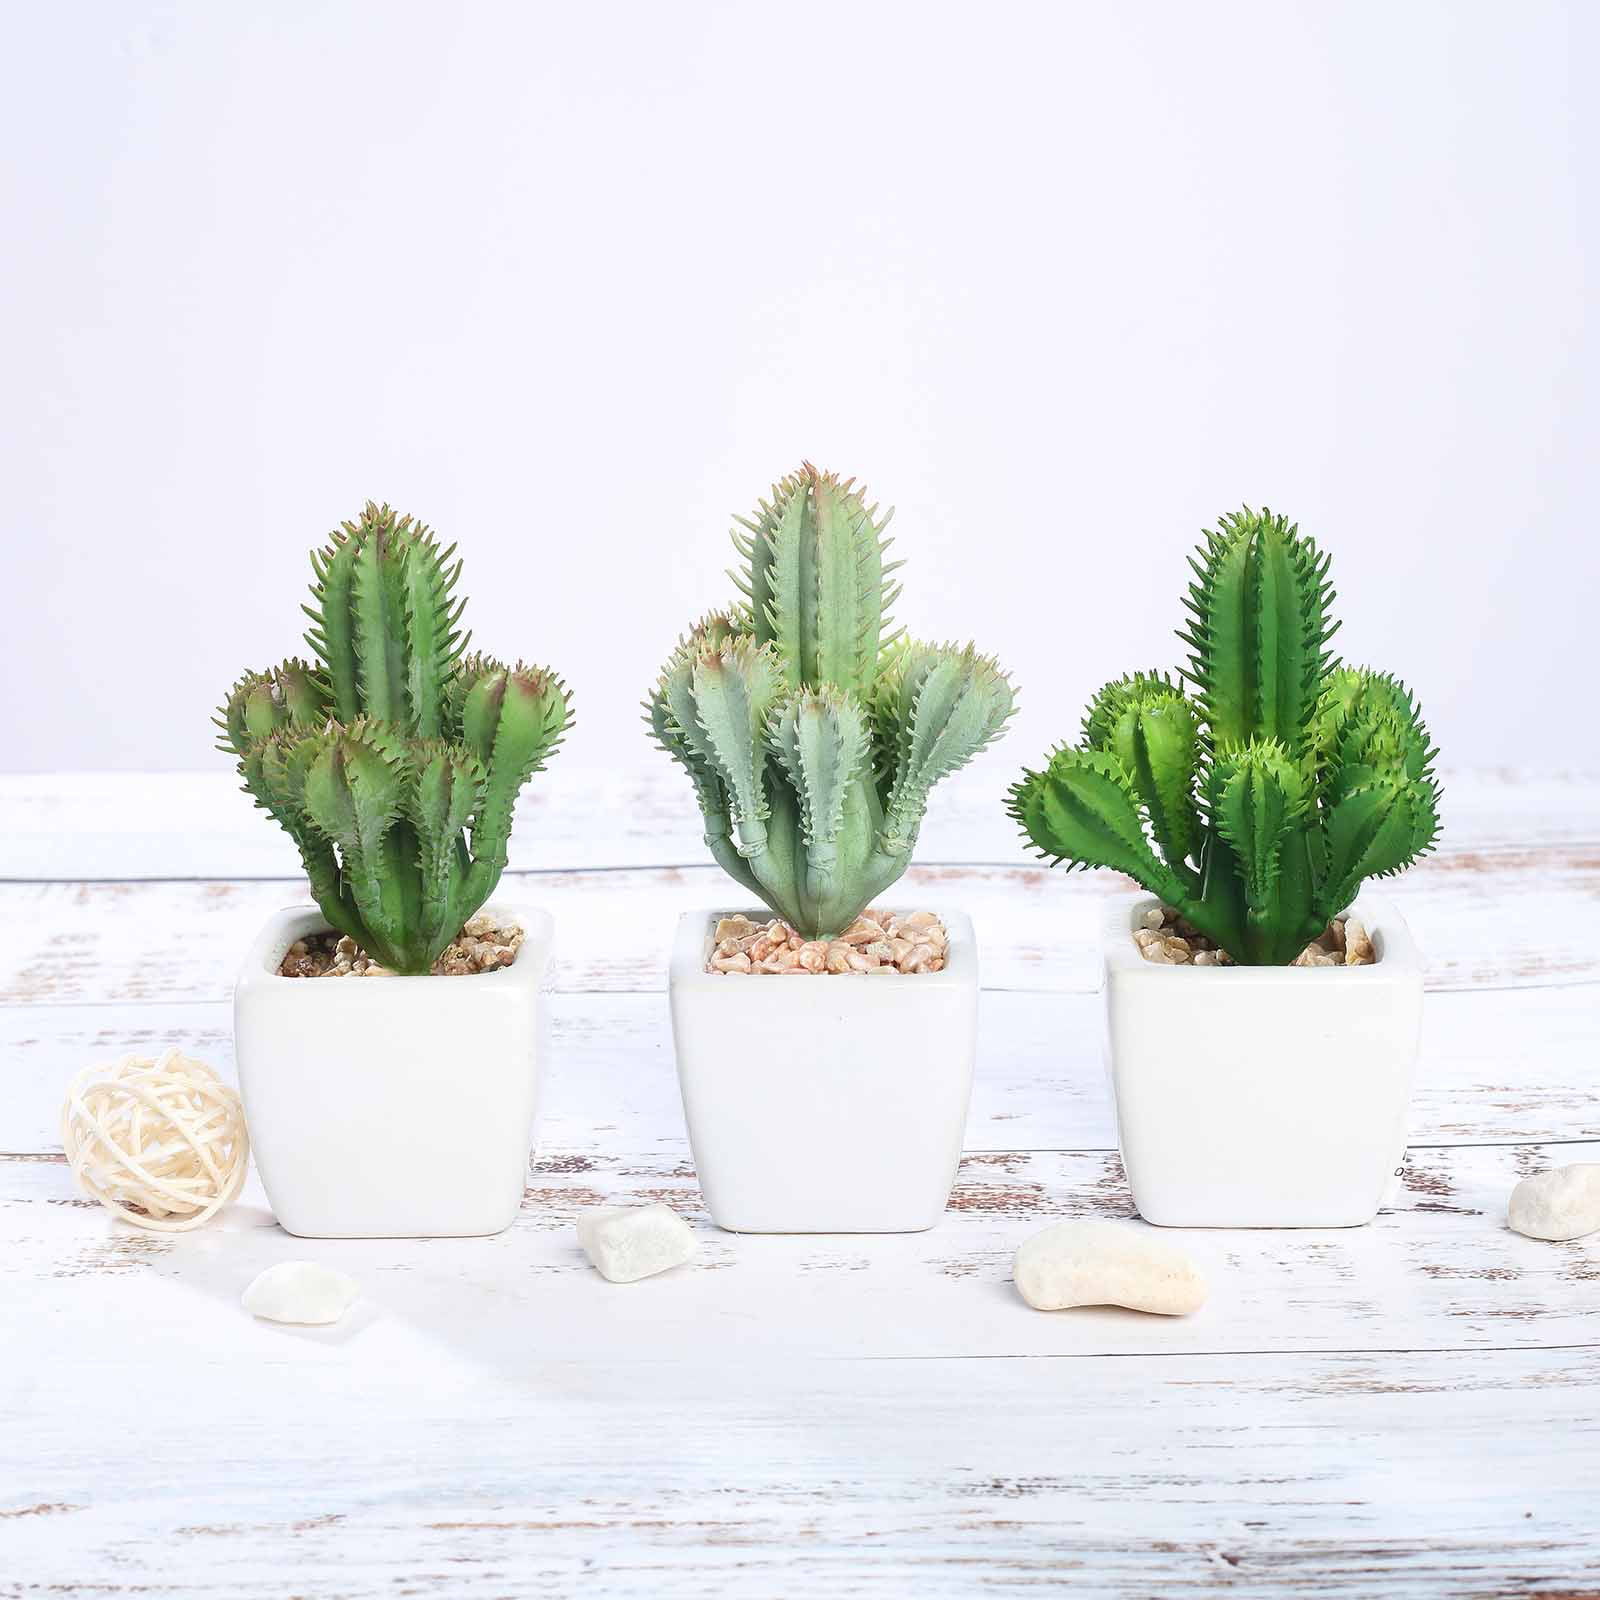 Details about   3 5" Assorted Green Faux Succulent Cactus Plants with Off White Ceramic Pots 